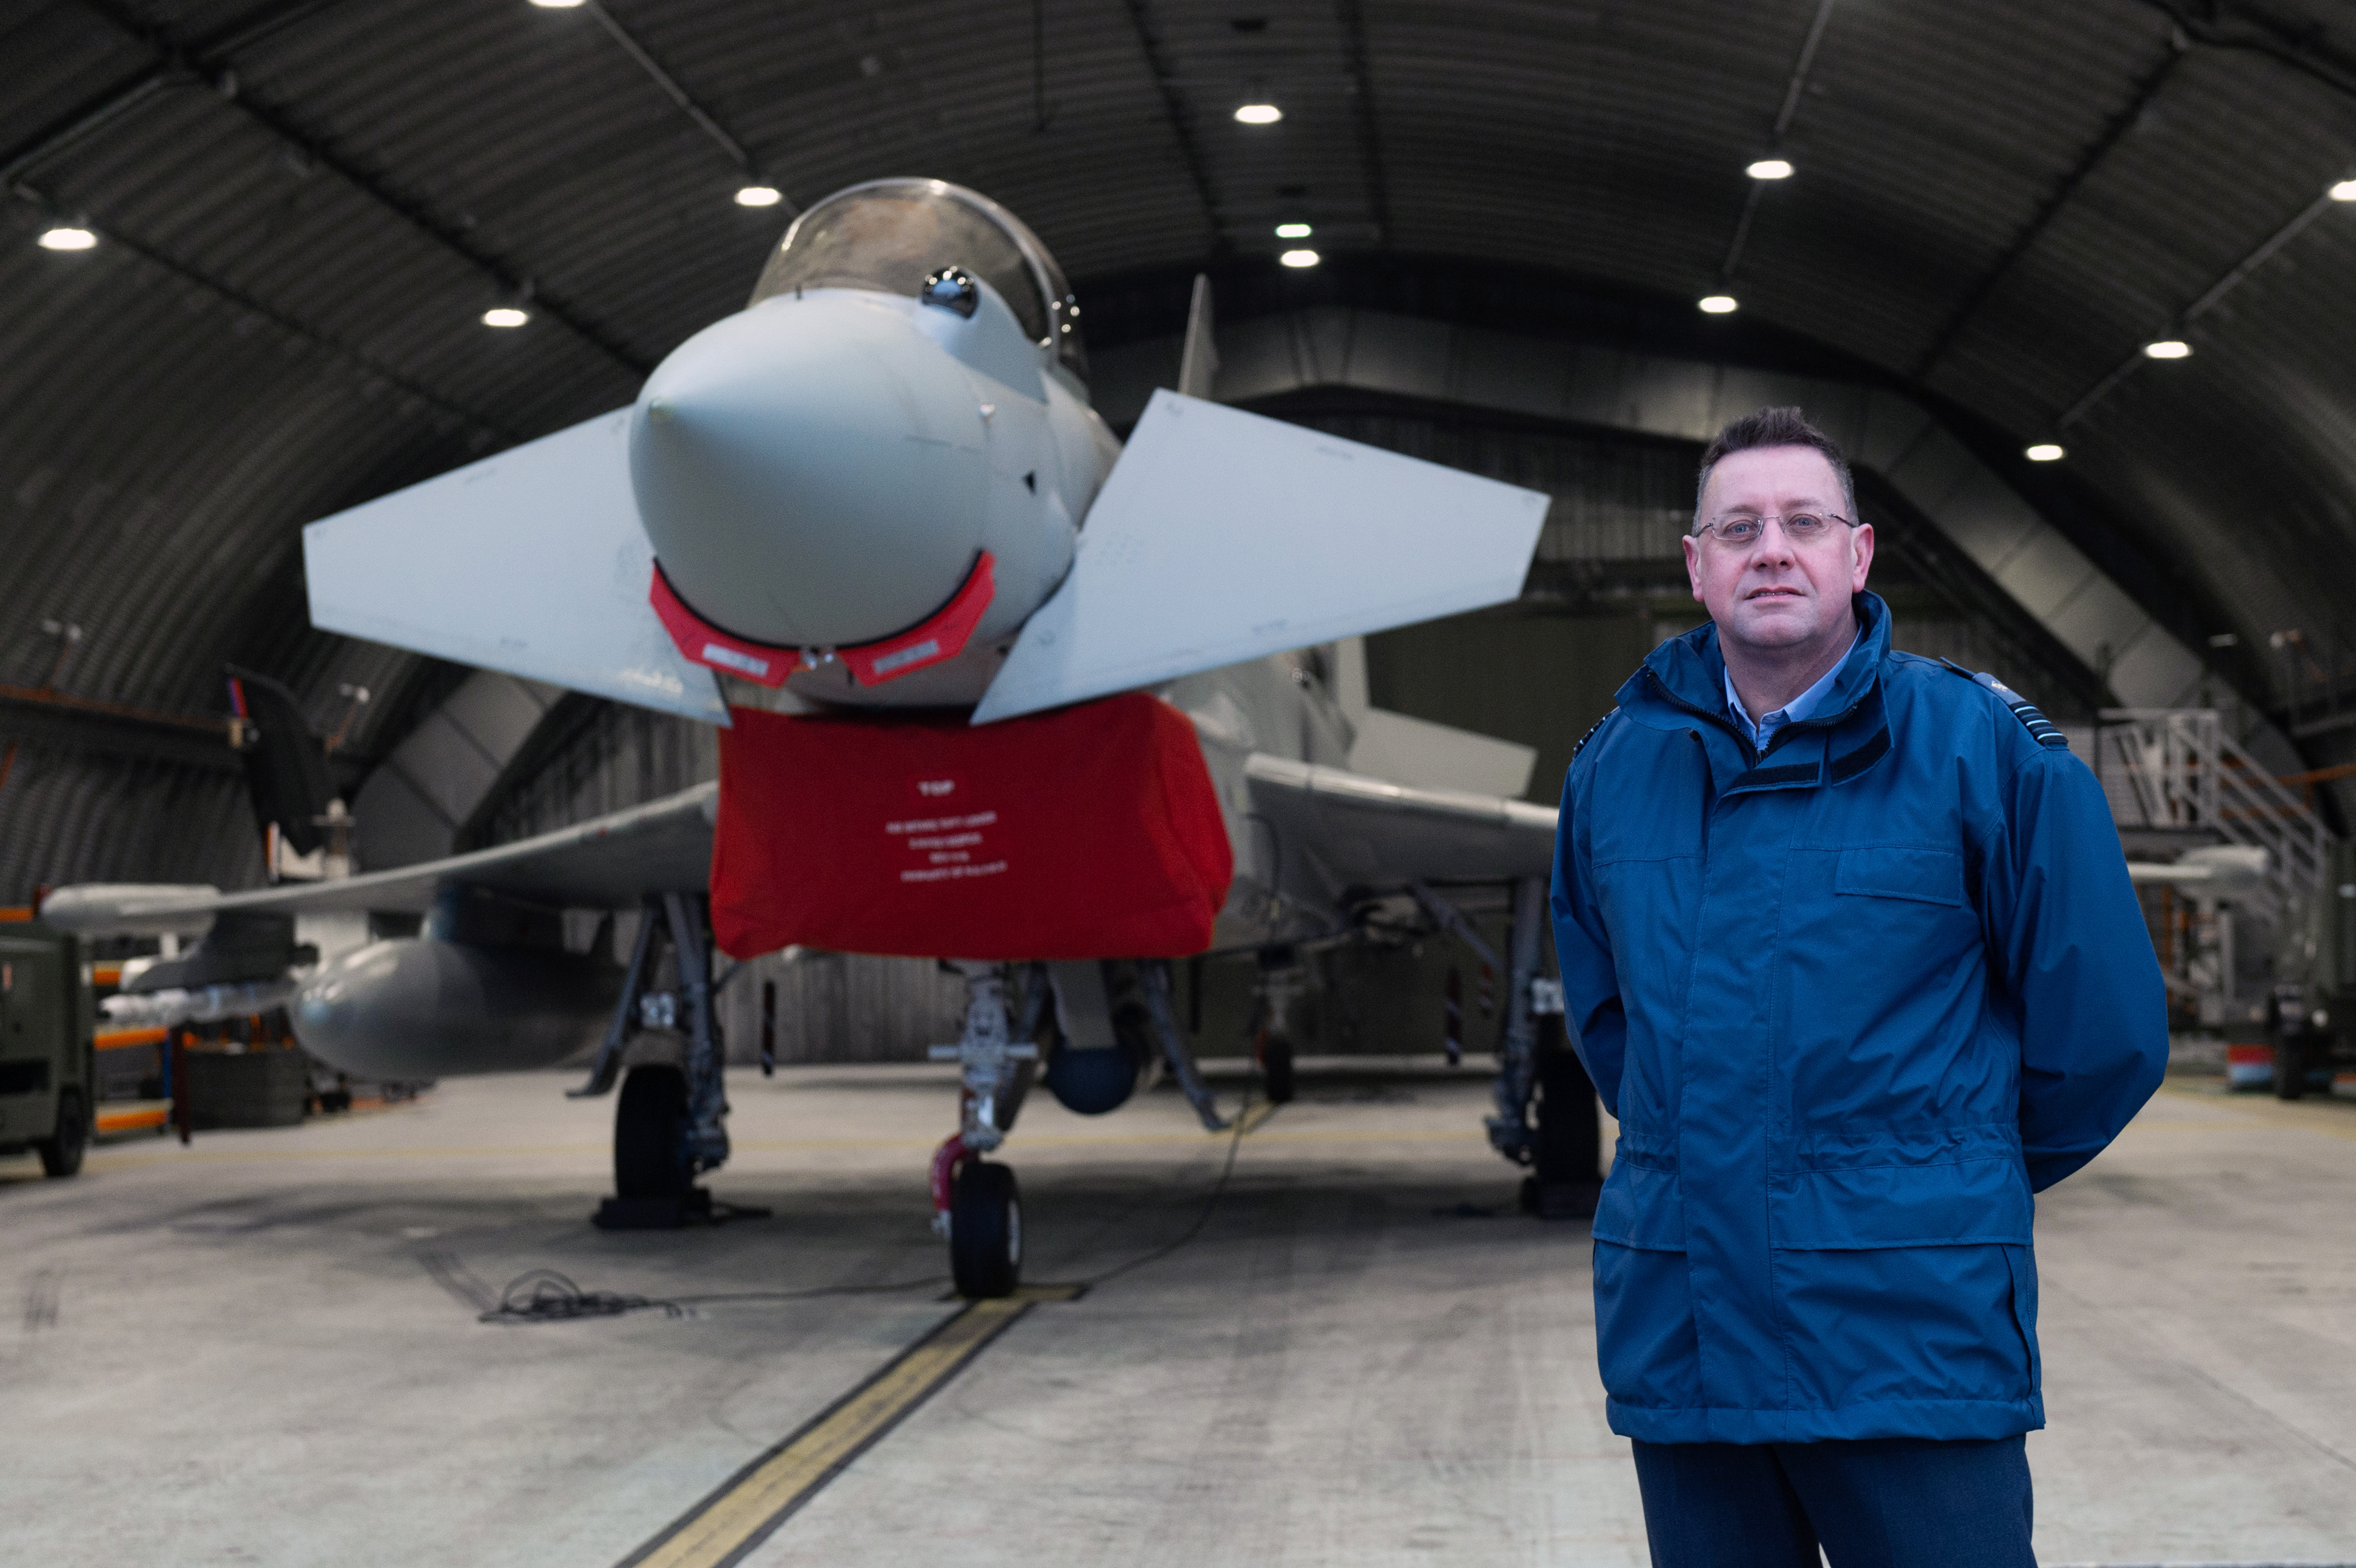 Pictures by JASON HEDGES
URN: CR0017235  
Pictures show RAF Lossiemouth and the QRA facility at the base.
Picture: Senior Chaplin, Wing Commander Rev. Colin Weir is pictured at an armoured shelter with an RAF Typhoon in the background.
Pictures by JASON HEDGES